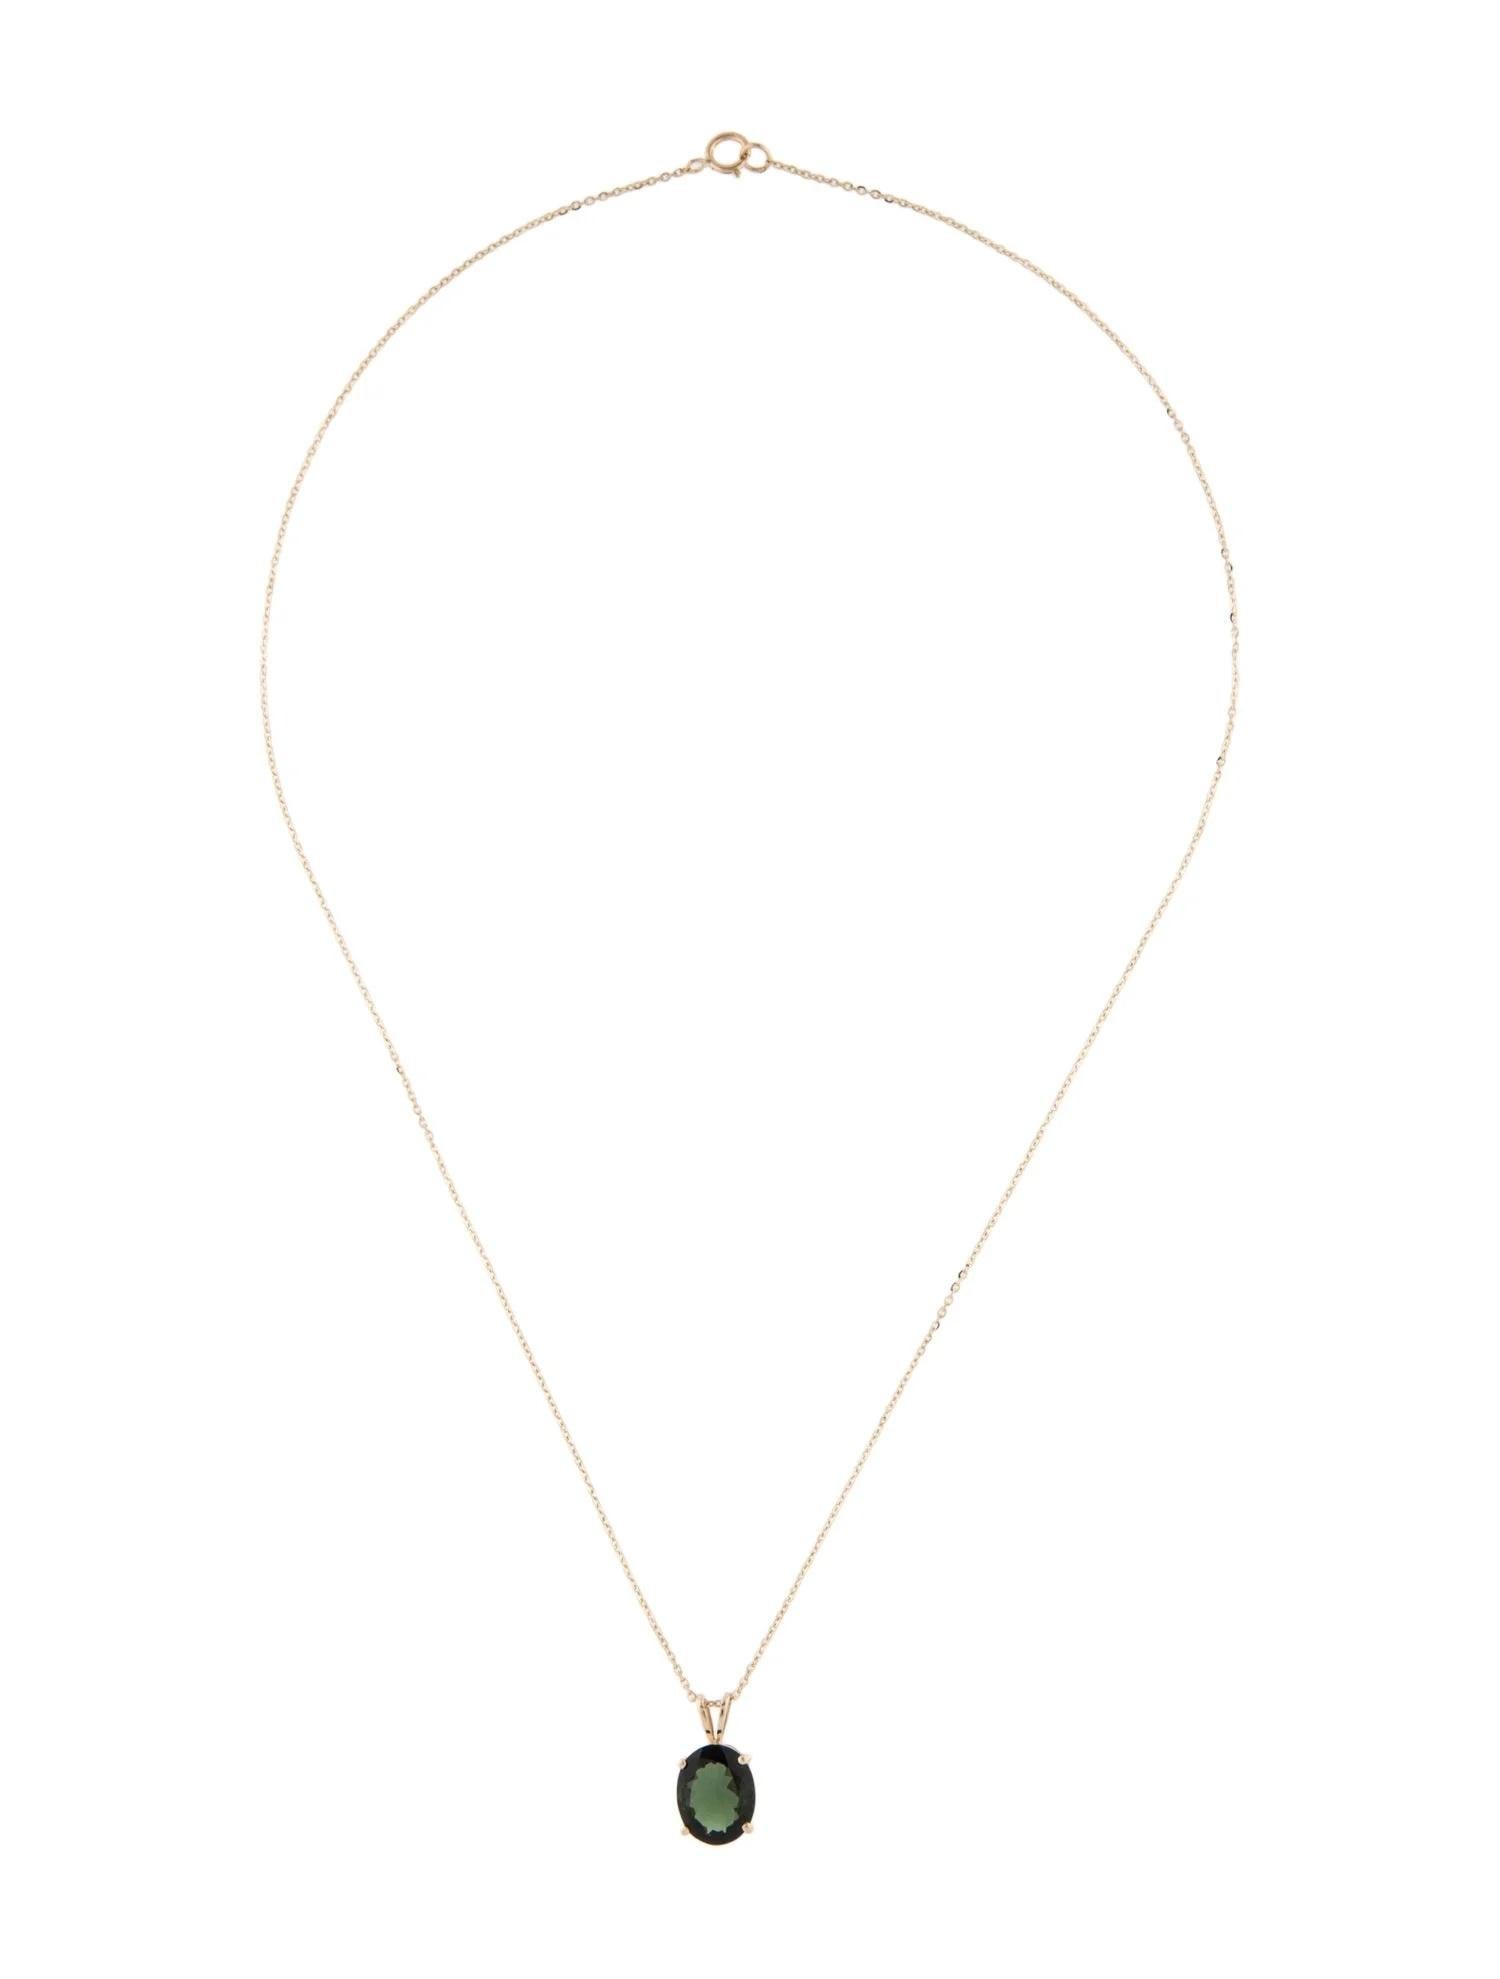 Elevate your style with this exquisite 14K yellow gold pendant necklace featuring a stunning oval green tourmaline as its centerpiece. The tourmaline, with a generous carat weight of 2.79, showcases captivating hues of green, adding a touch of